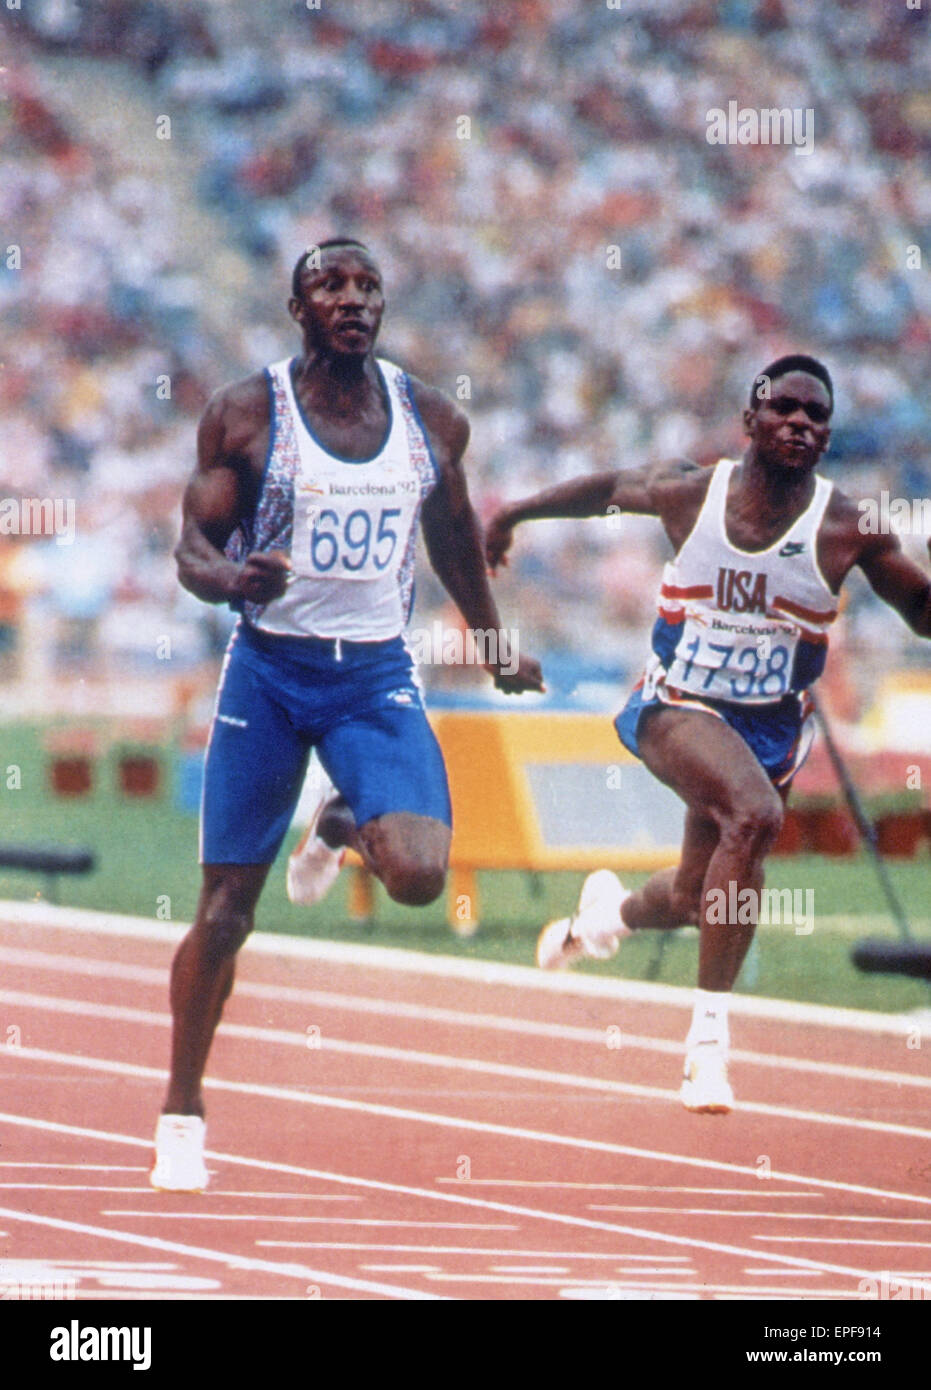 Linford Christie running in 100m Final at the Barcelona Olympics, Spain, Saturday 1st August 1992. Also pictured, Dennis Mitchell. Stock Photo